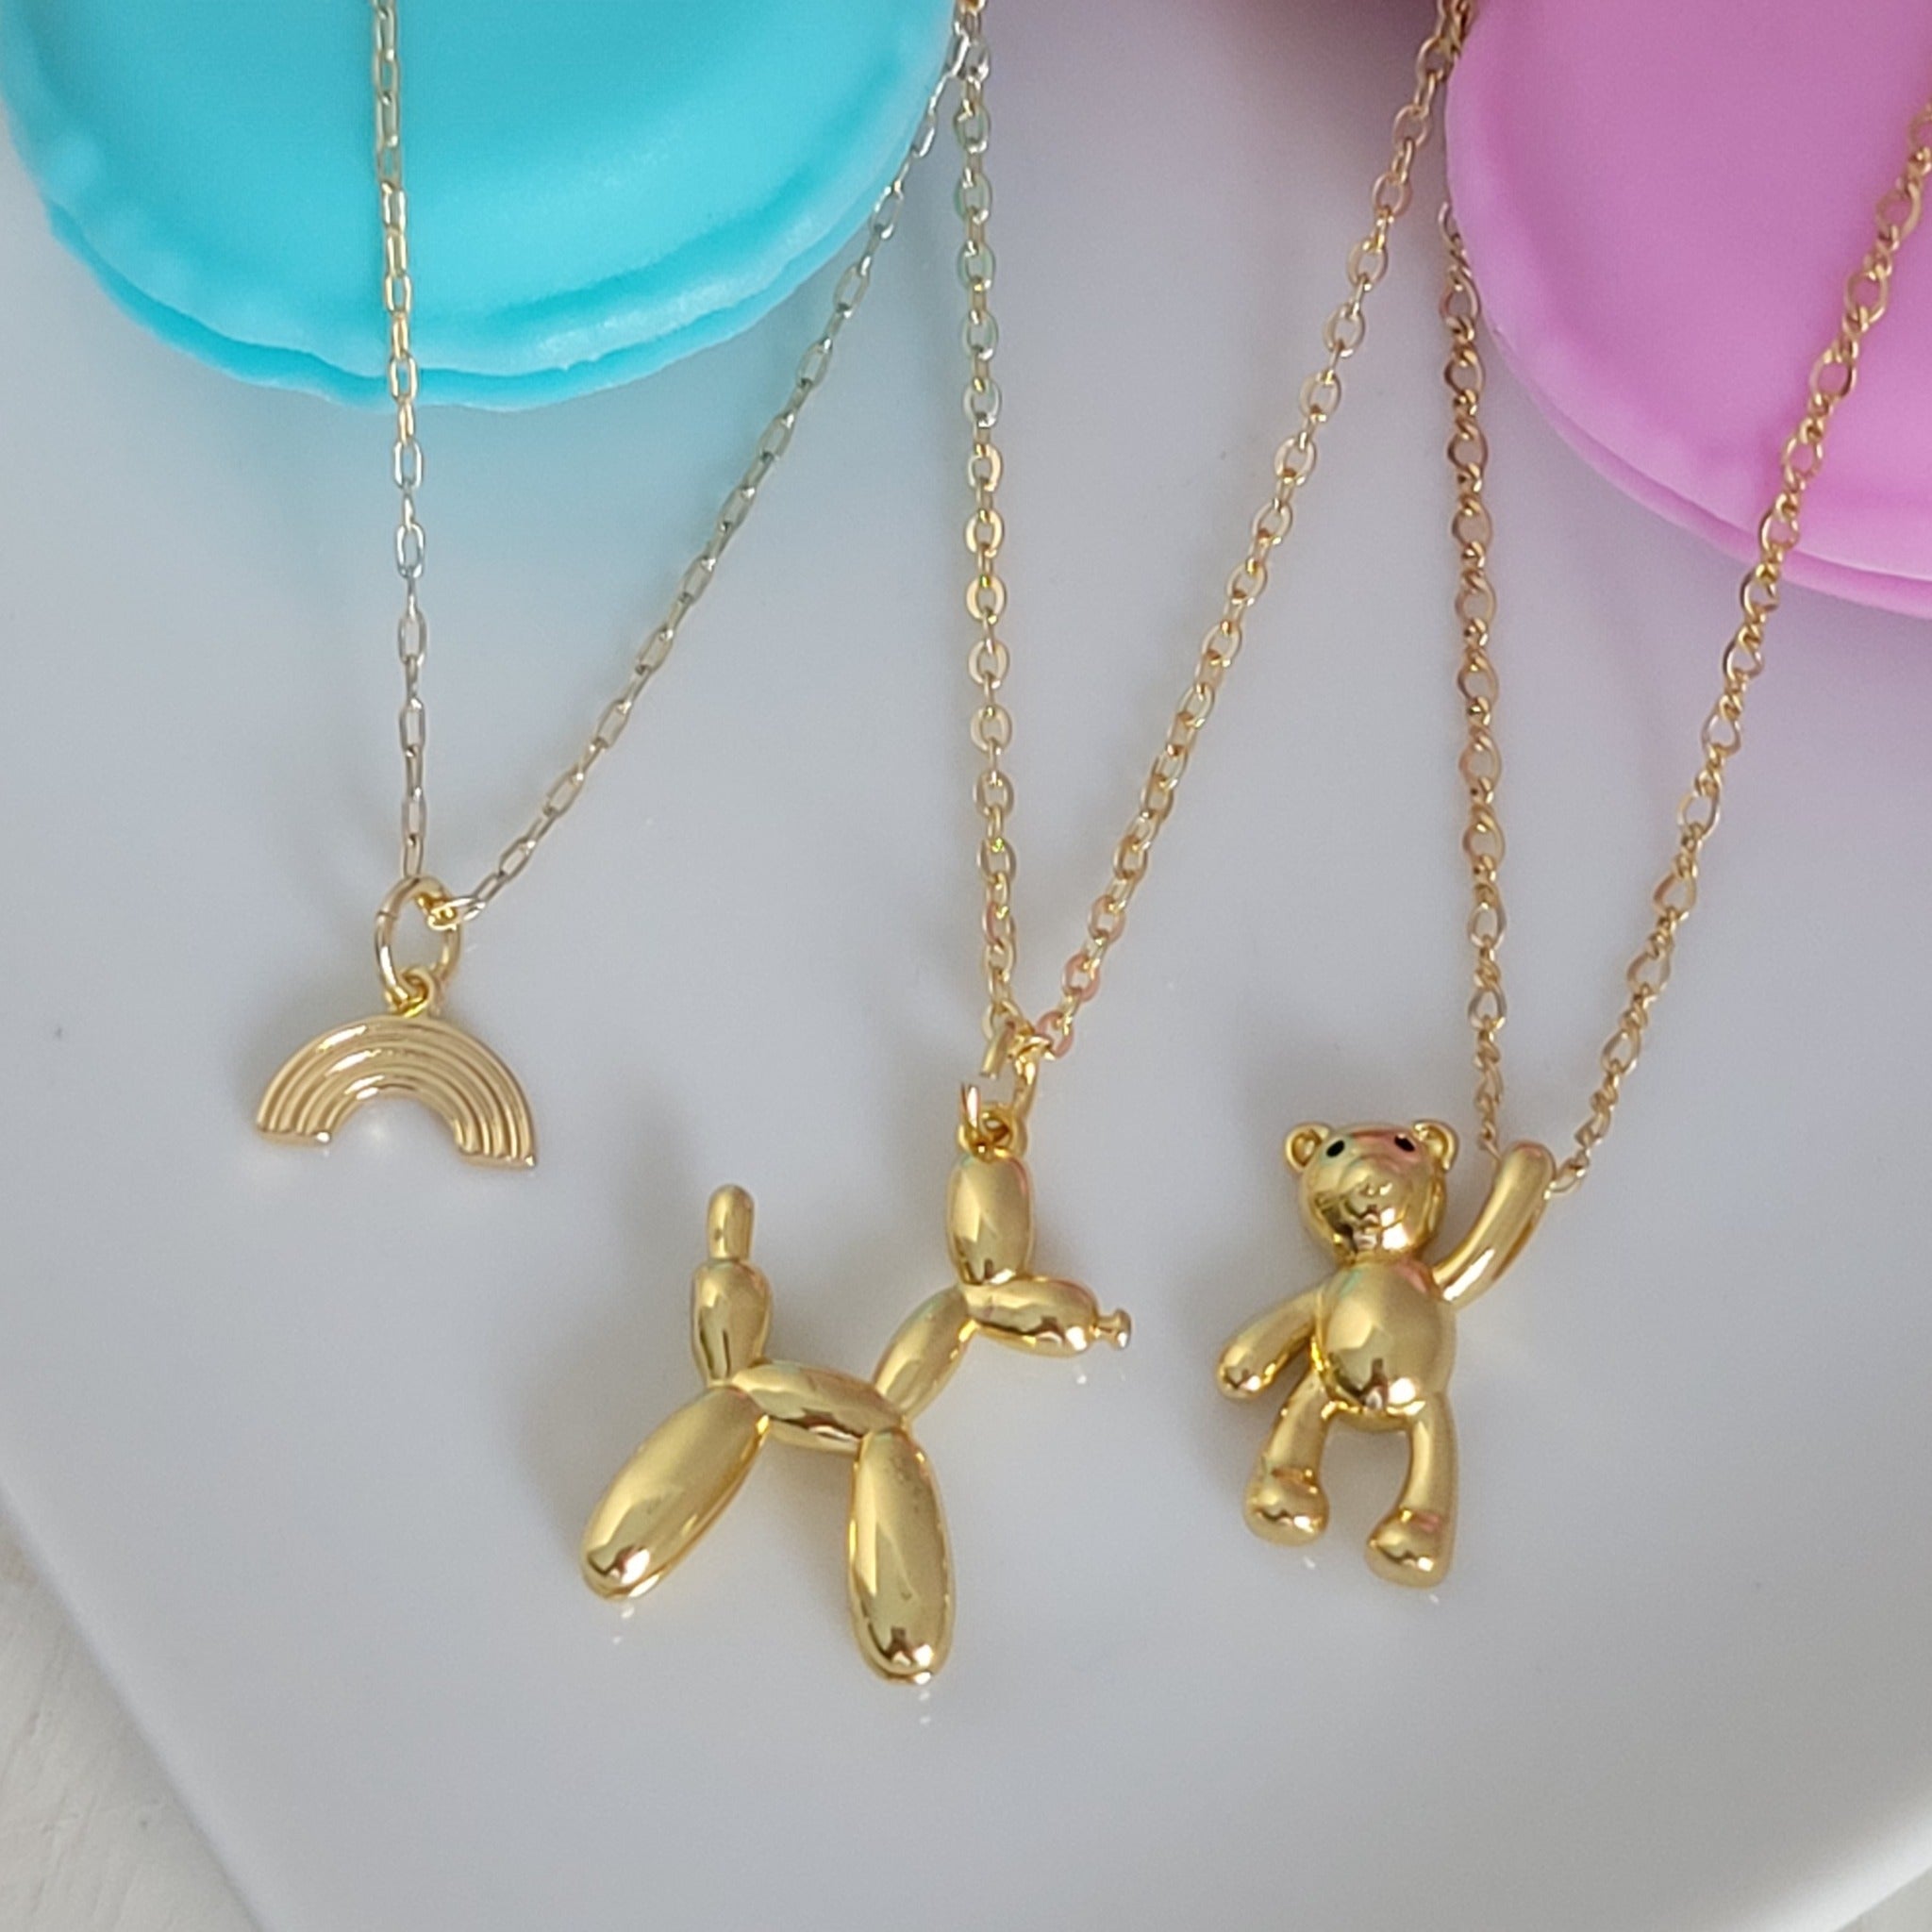 Buy 14K Solid Gold Teddy Bear Charm Necklace, Real 14K Gold Teddy Bear  Pendant, 22, 24 14K Cuban Chain, Real 14K Gold , Valentine's Day Gift  Online in India - Etsy